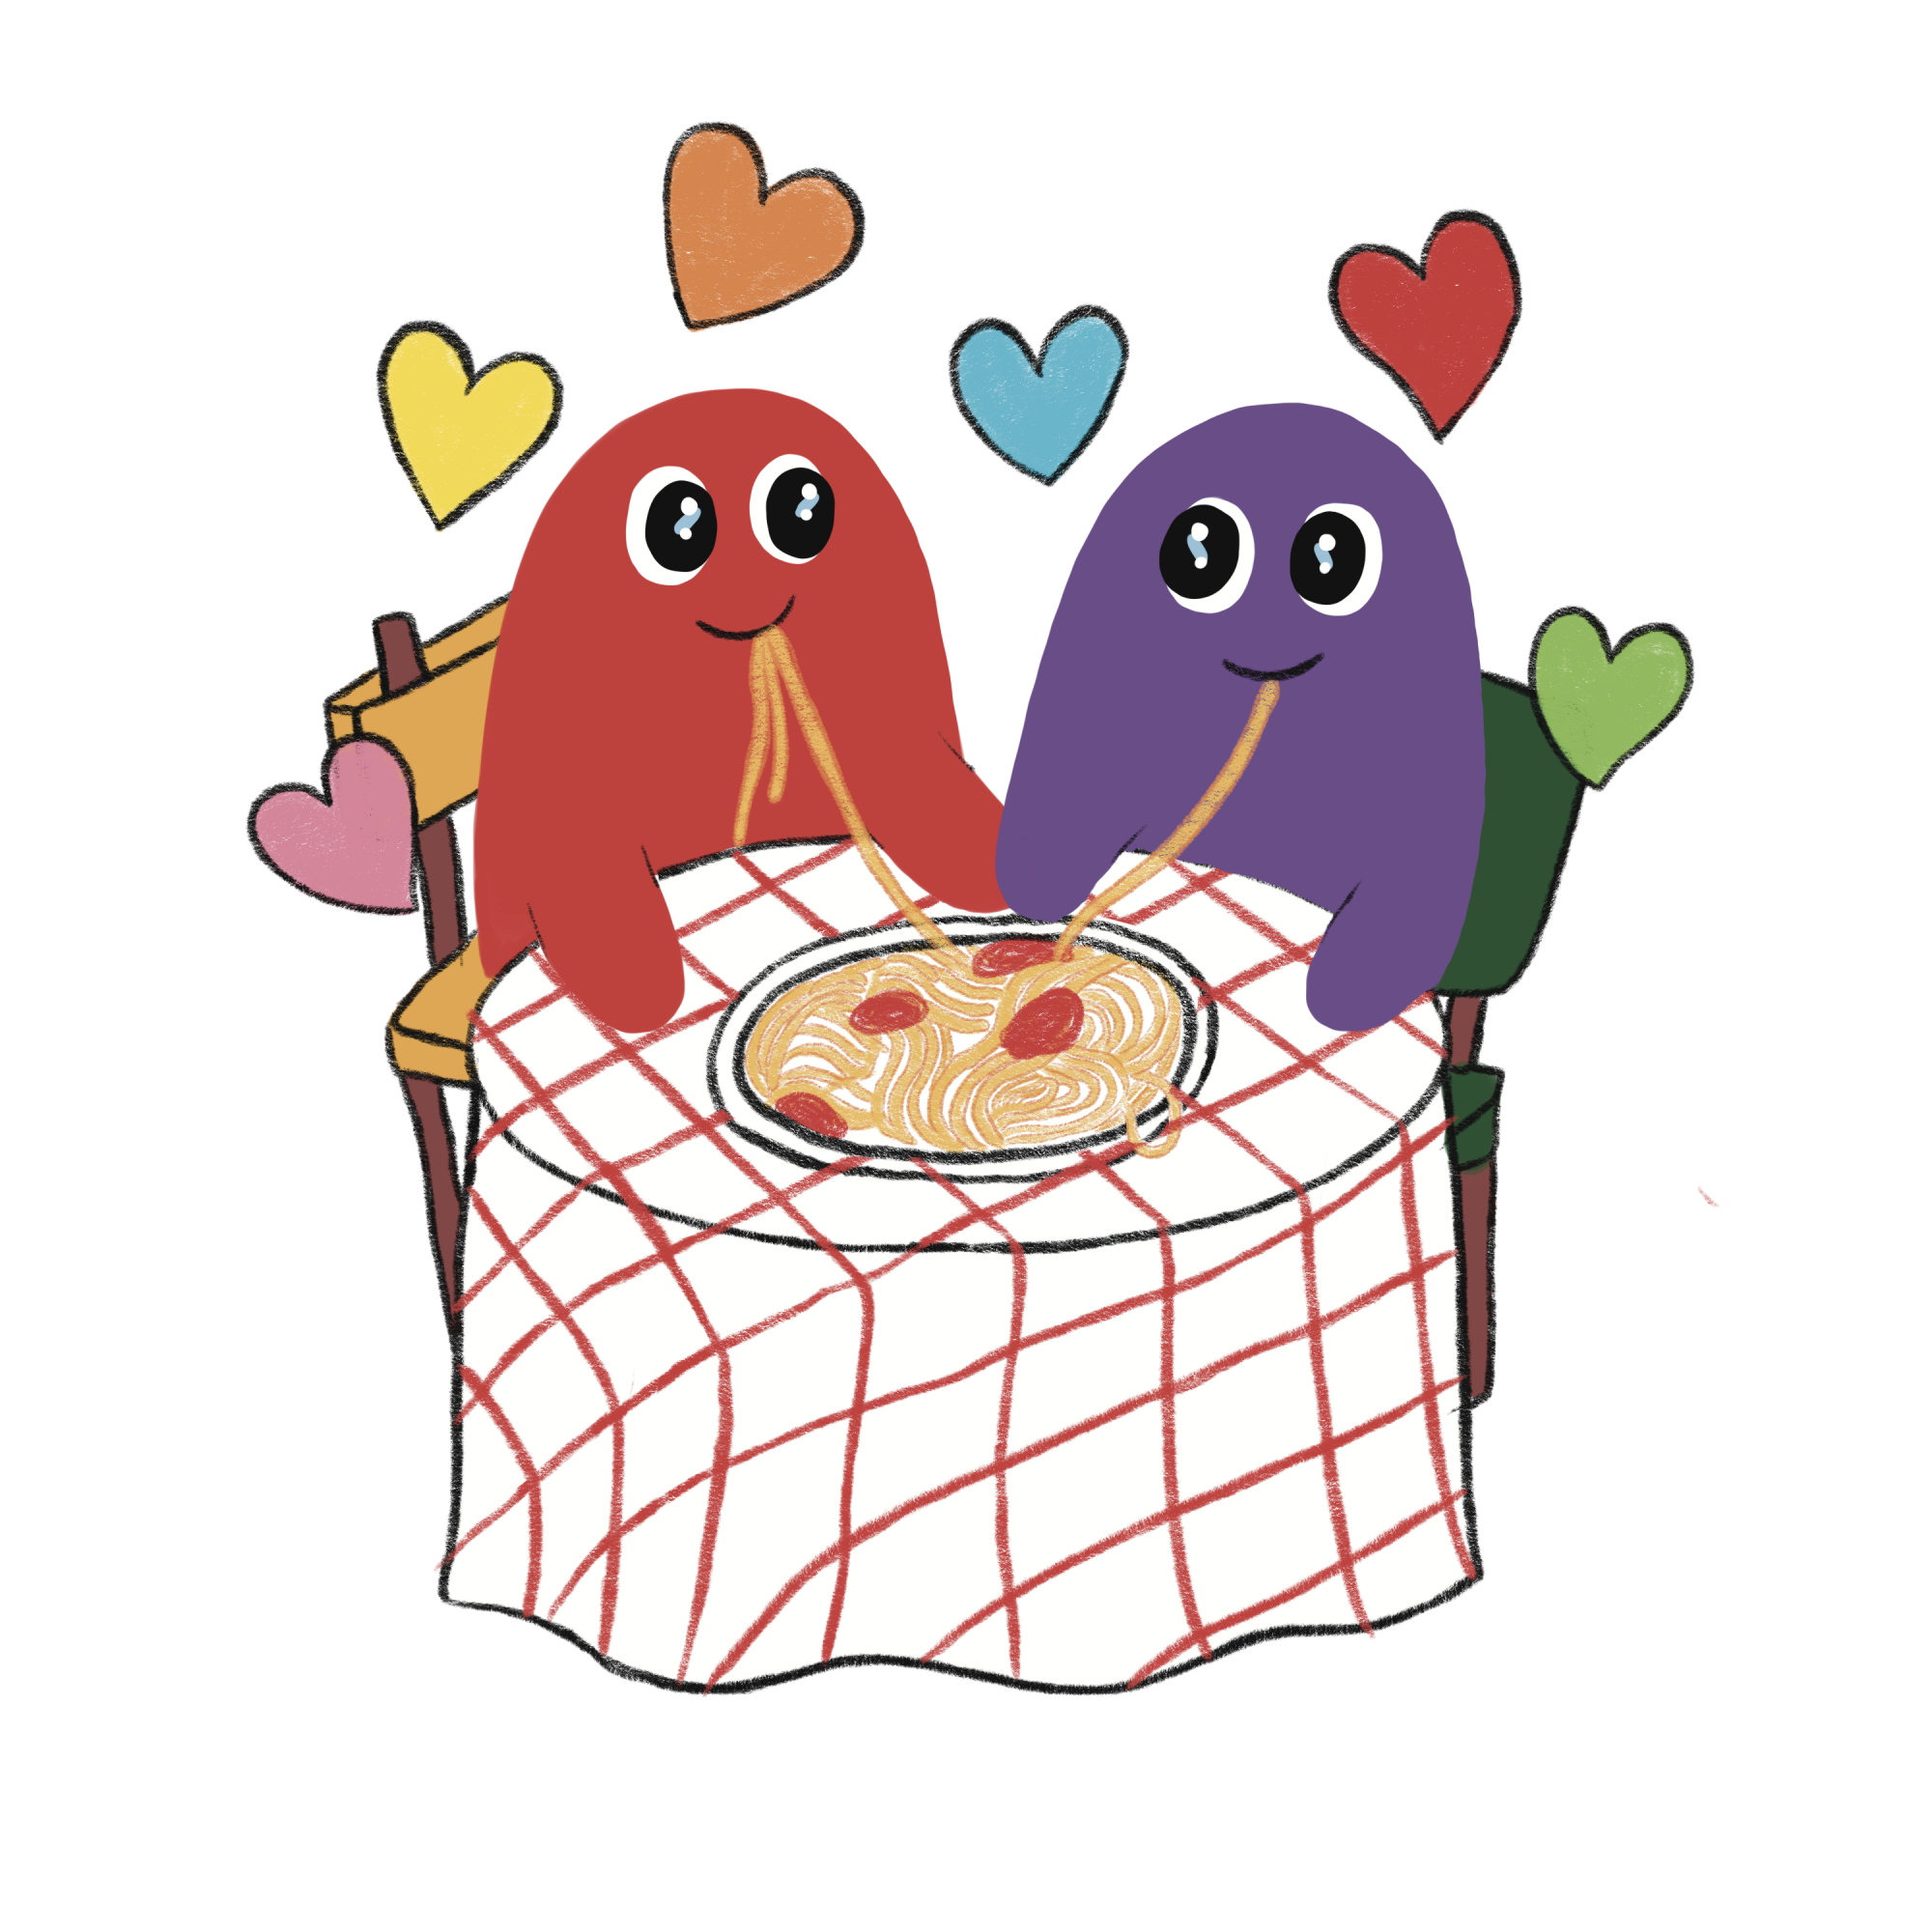 An illustration of two blobs eating spaghetti with hearts over their heads.